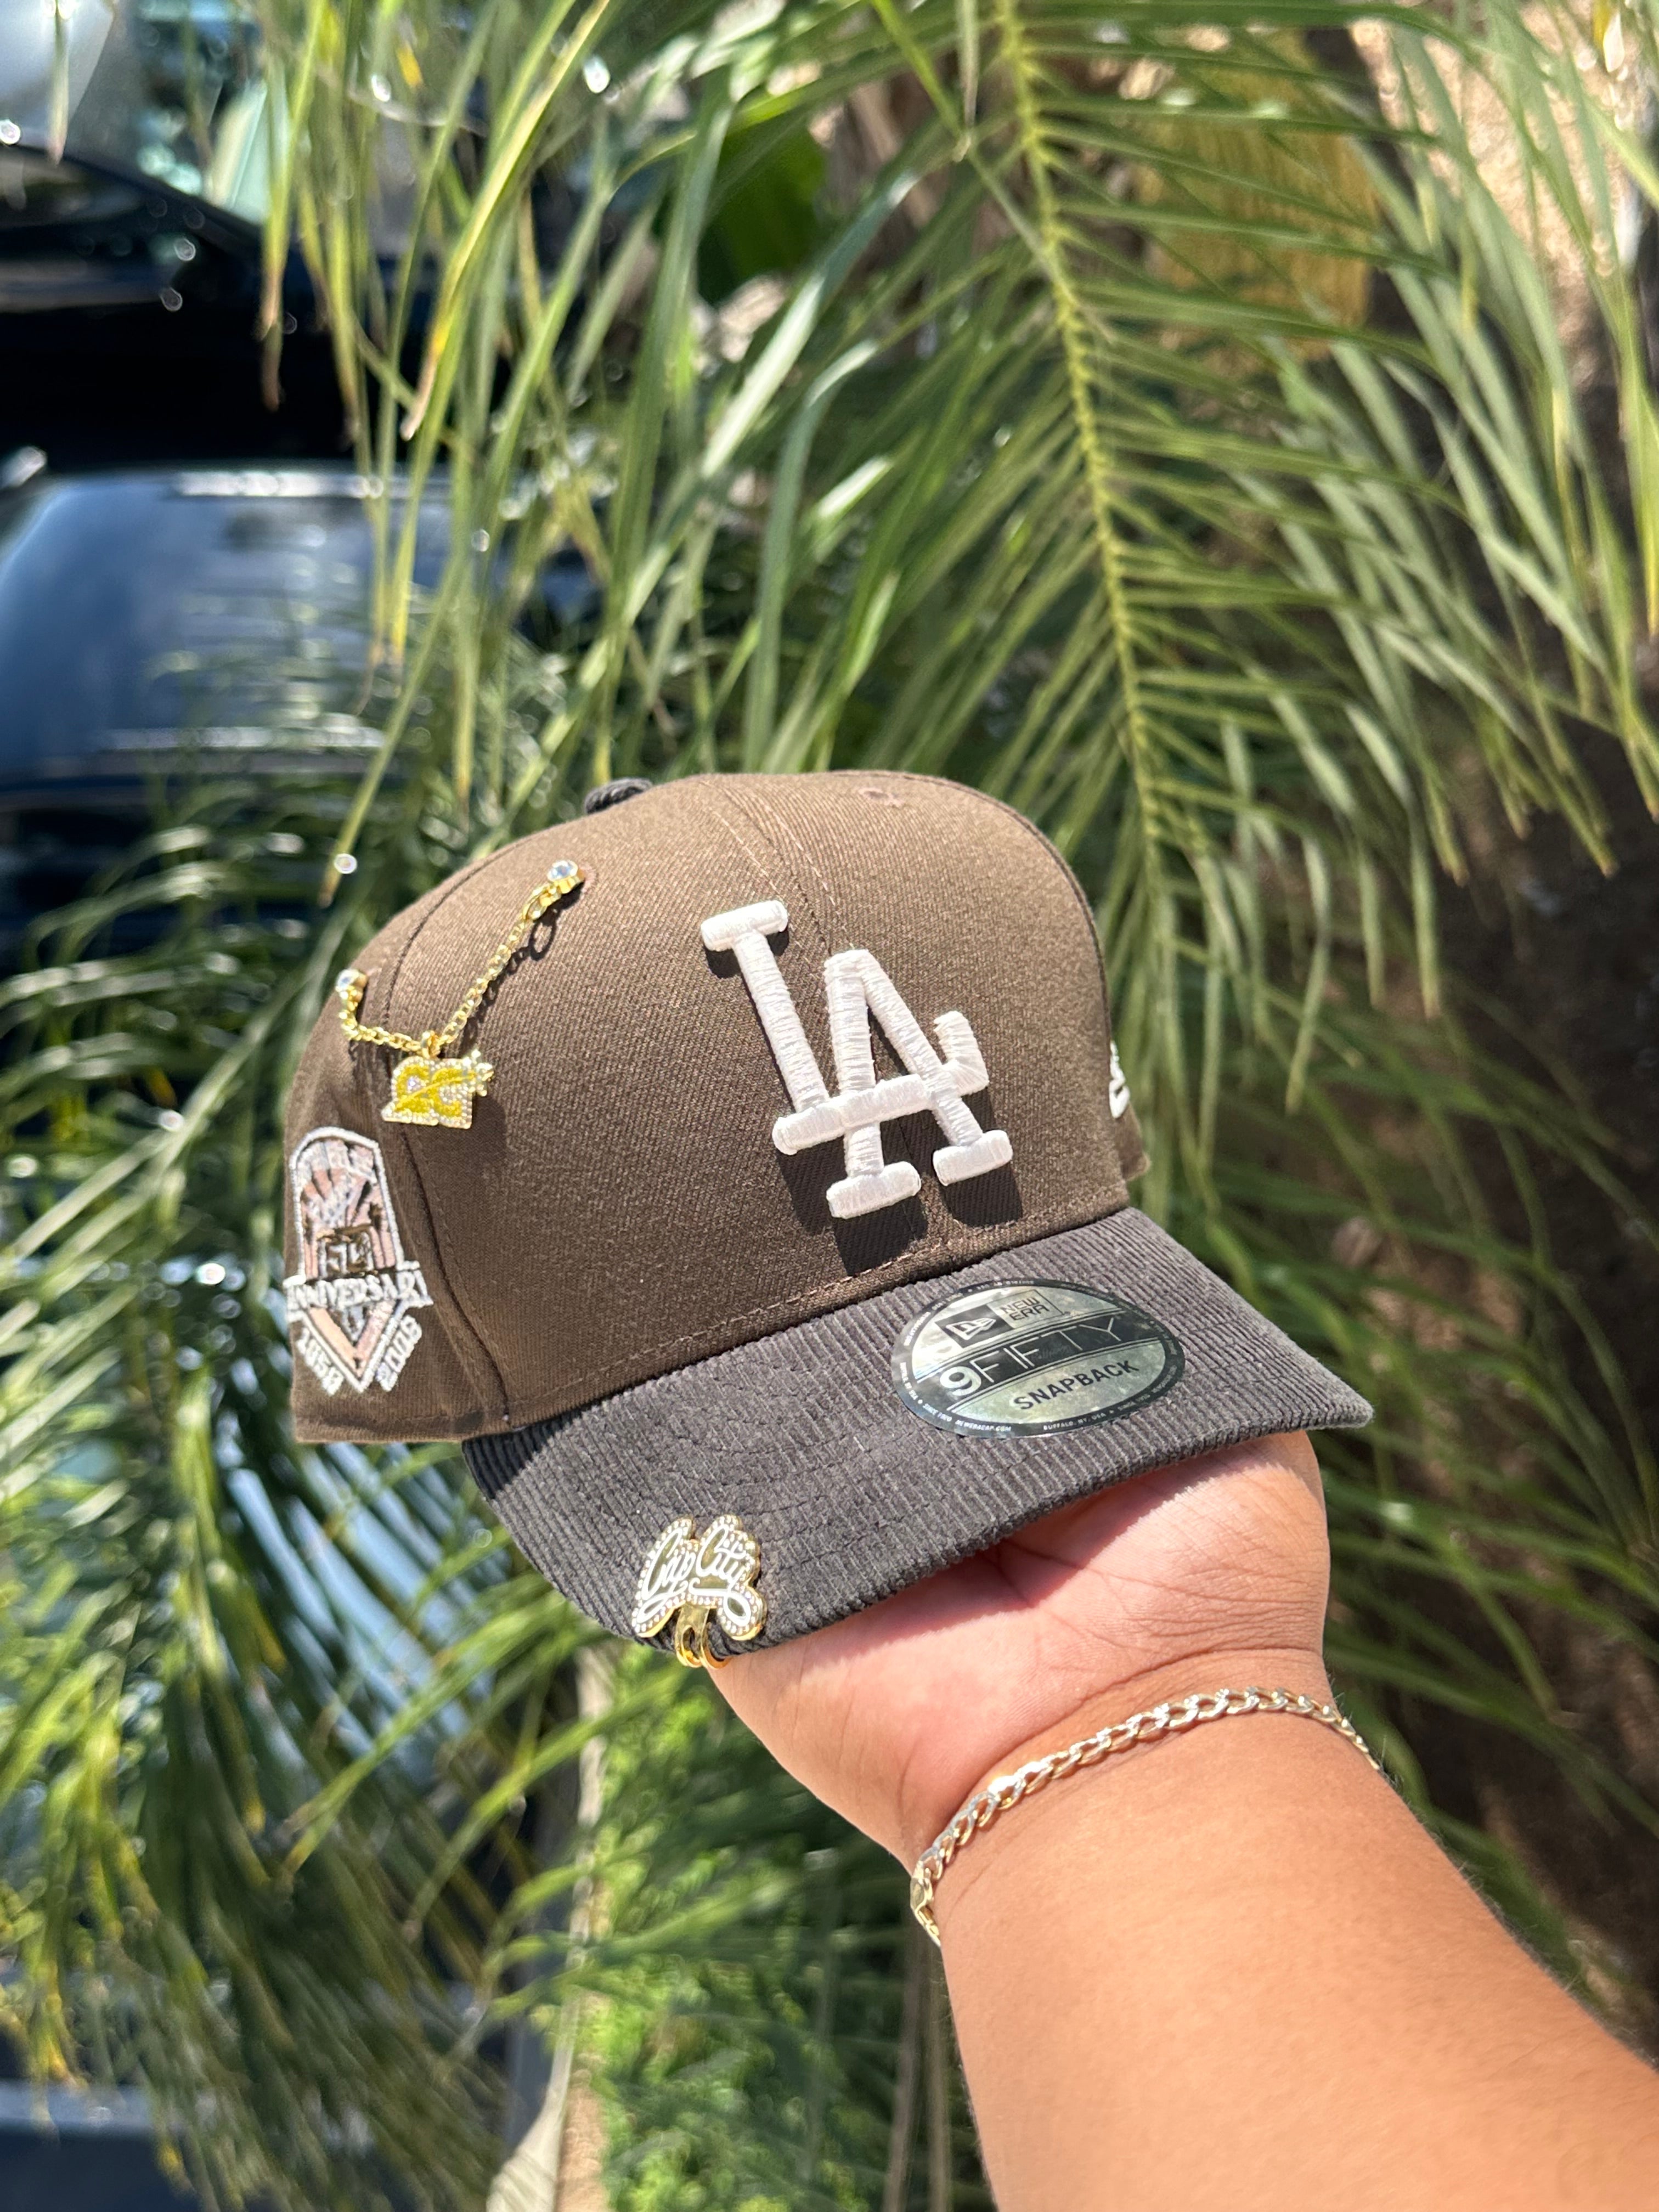 NEW ERA EXCLUSIVE 9FIFTY MOCHA/CORDUROY LOS ANGELES DODGERS TWO TONE SNAPBACK W/ 50TH ANNIVERSARY PATCH